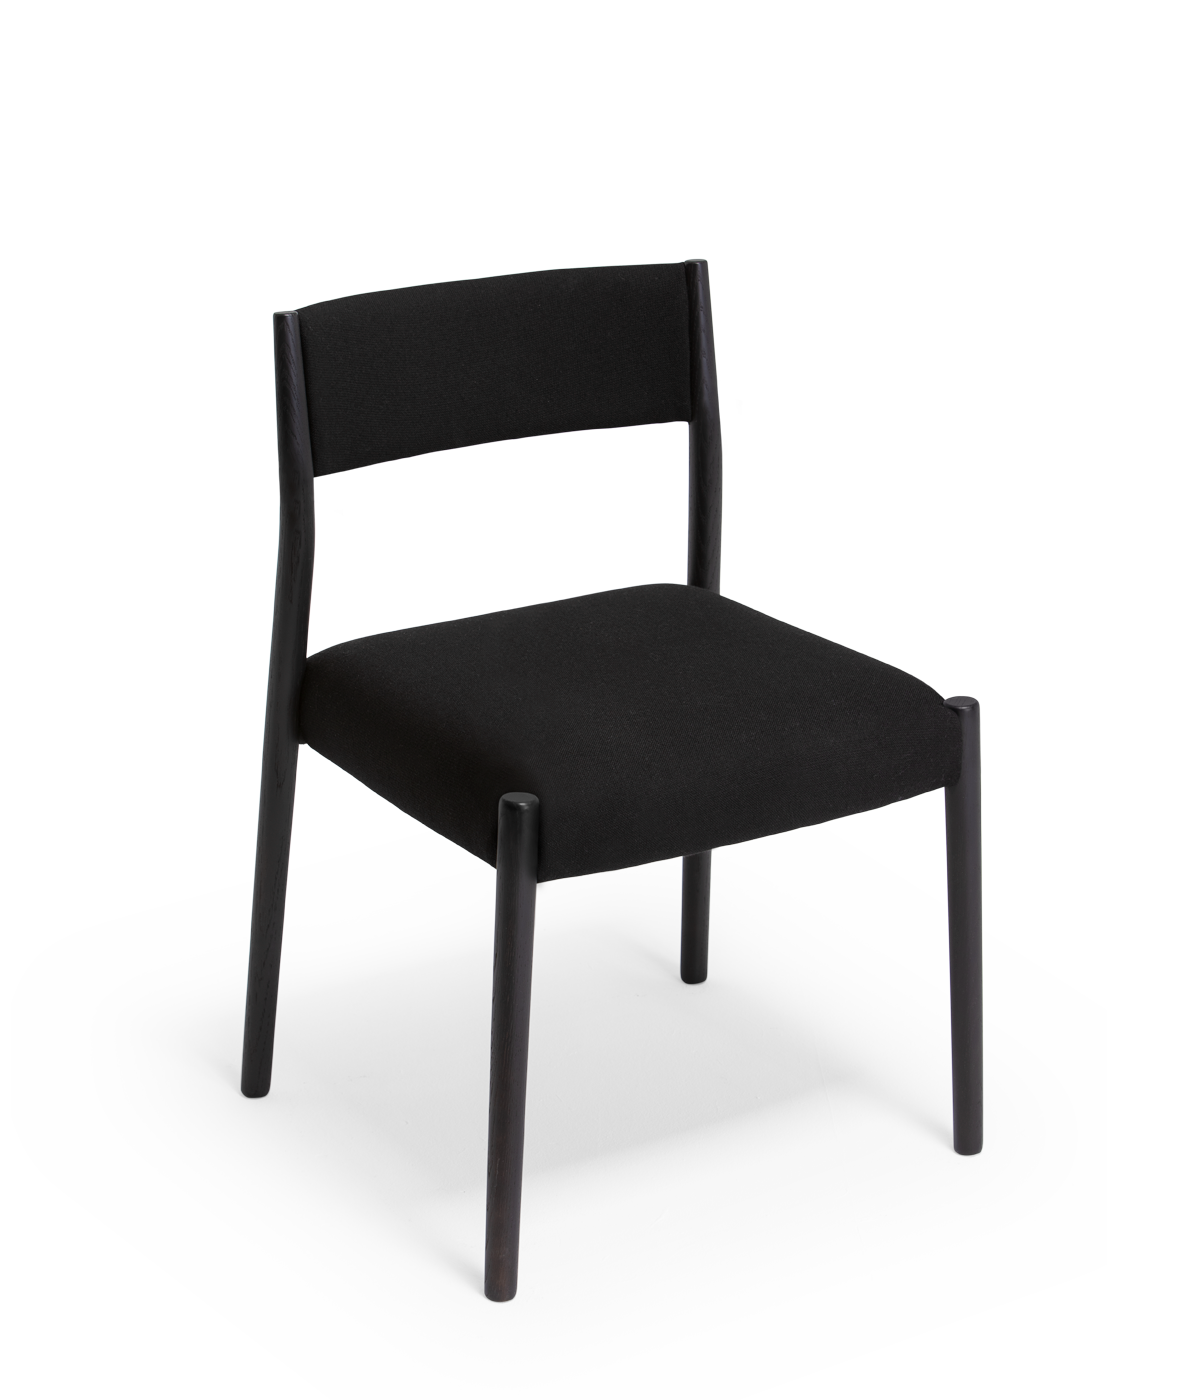 Bogart chair with upholstered seat and backrest - Vergés